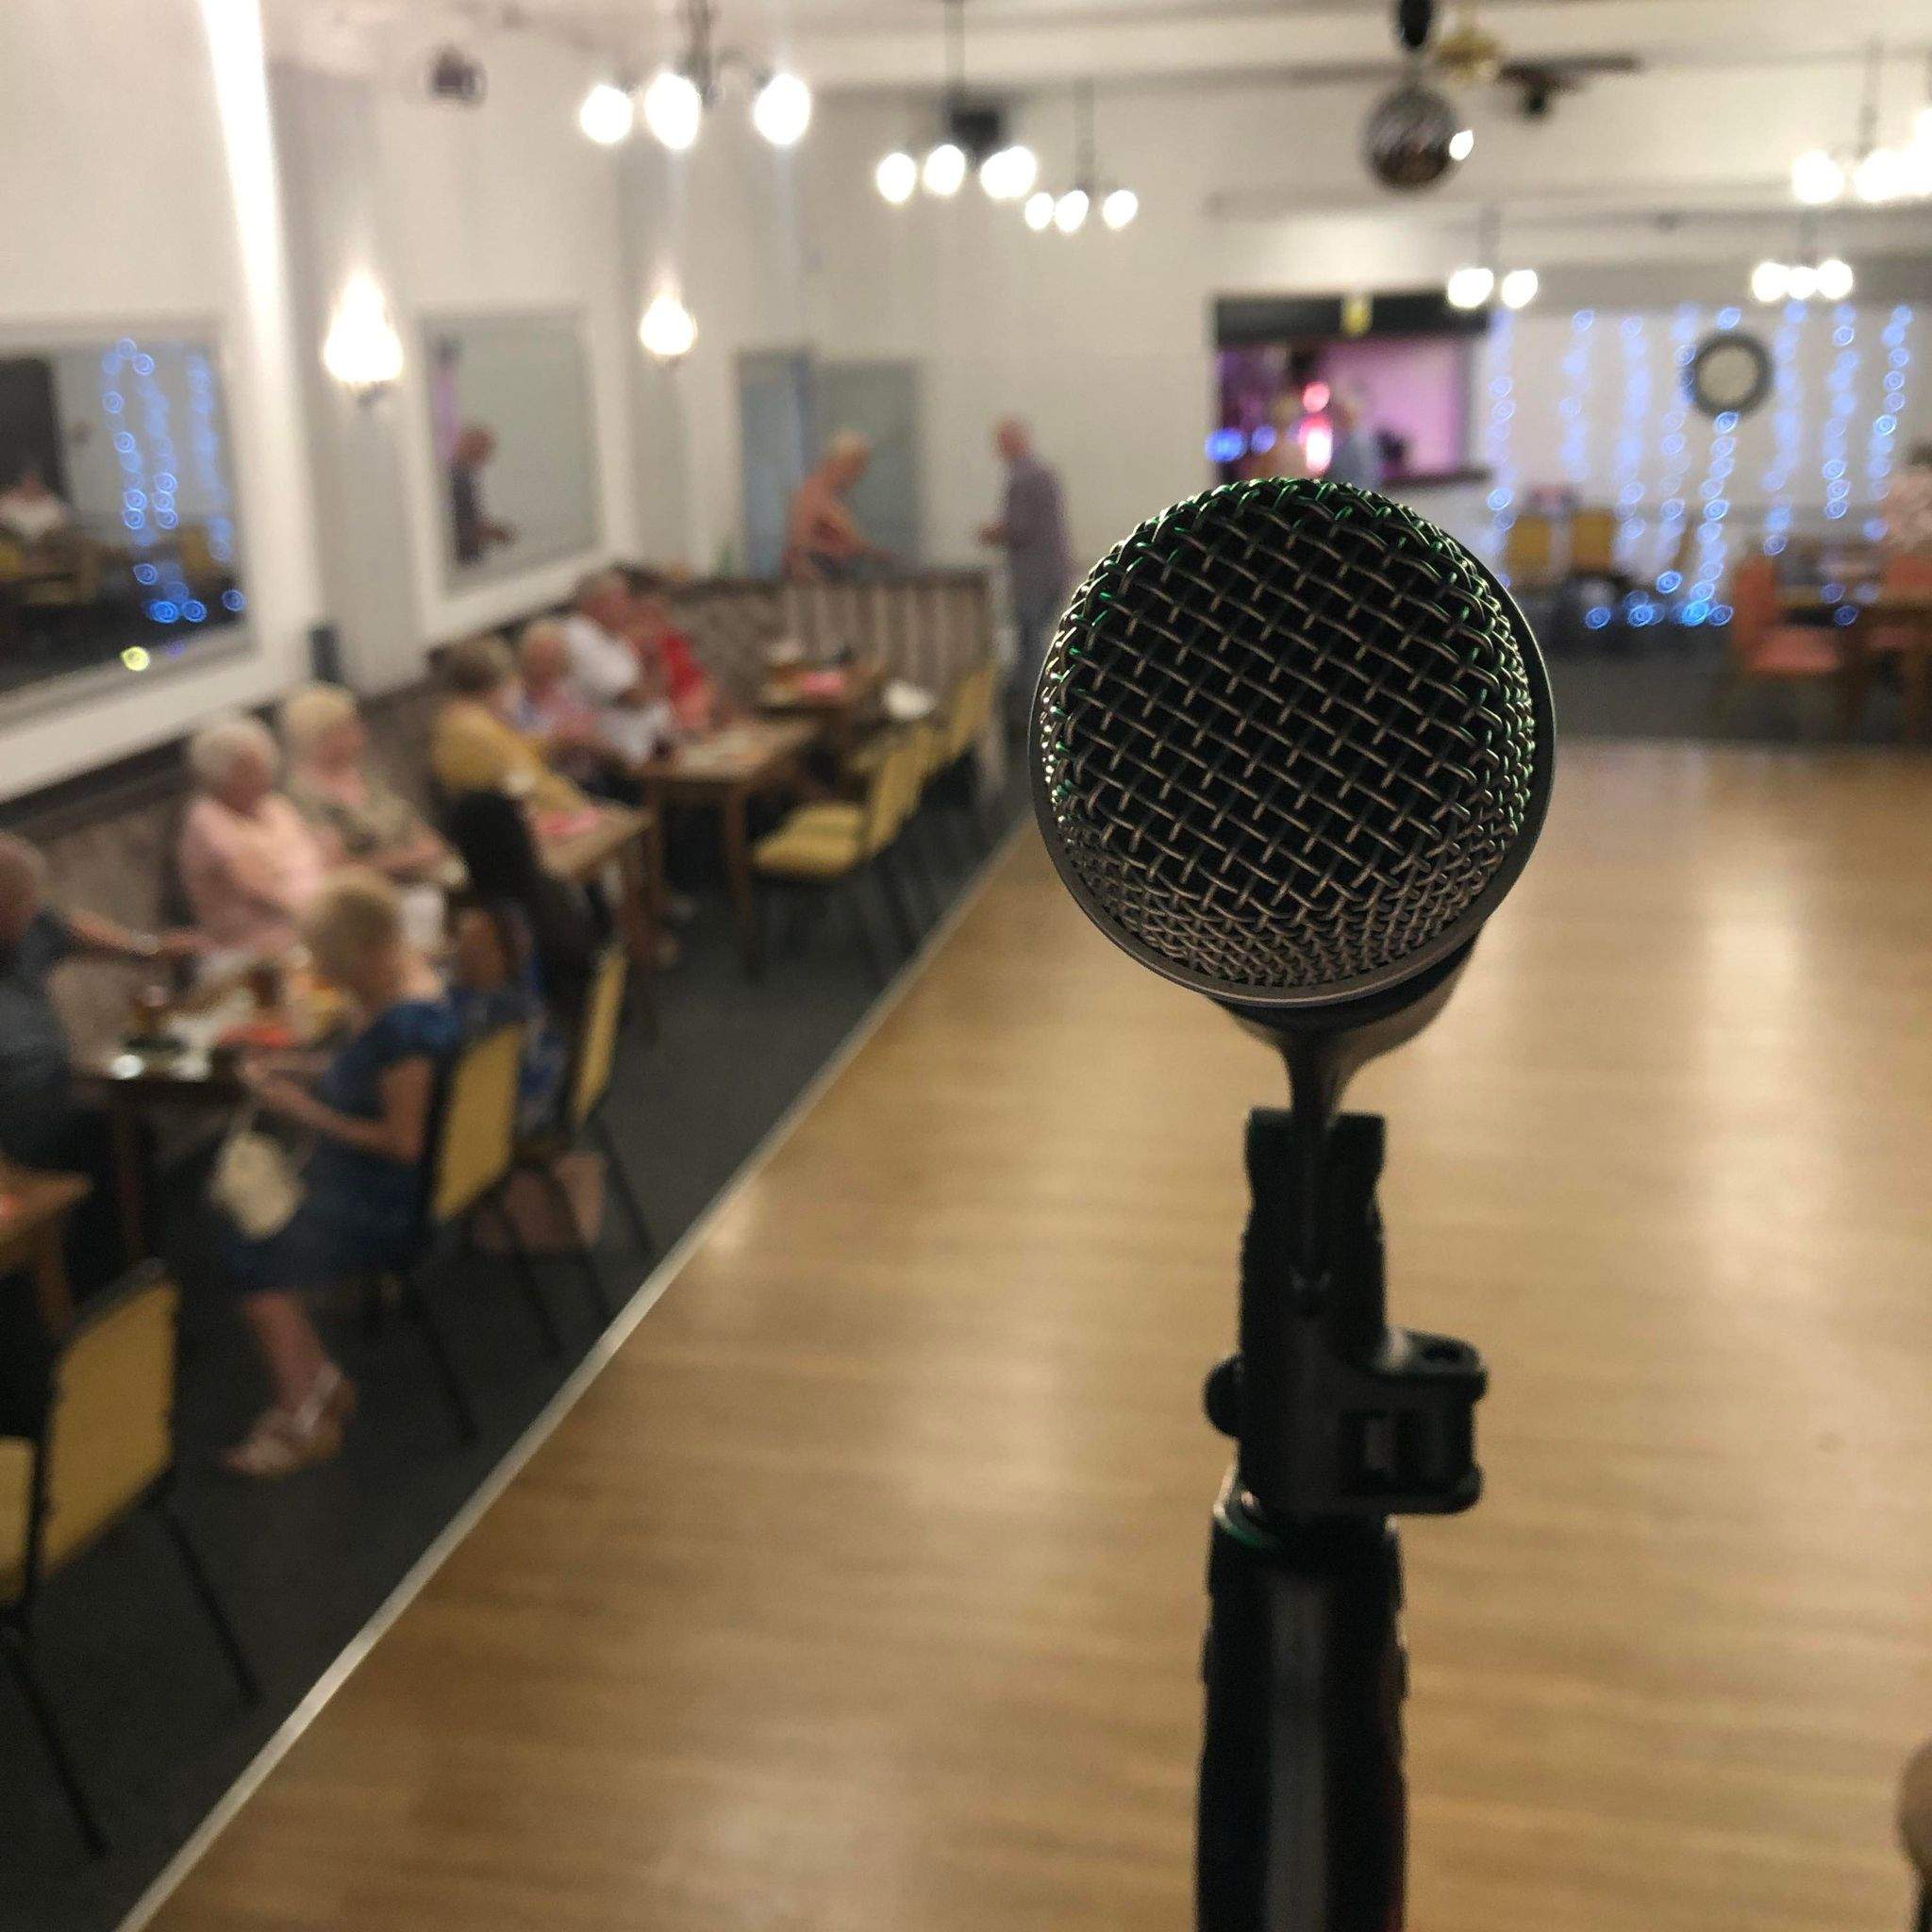 View from the mic